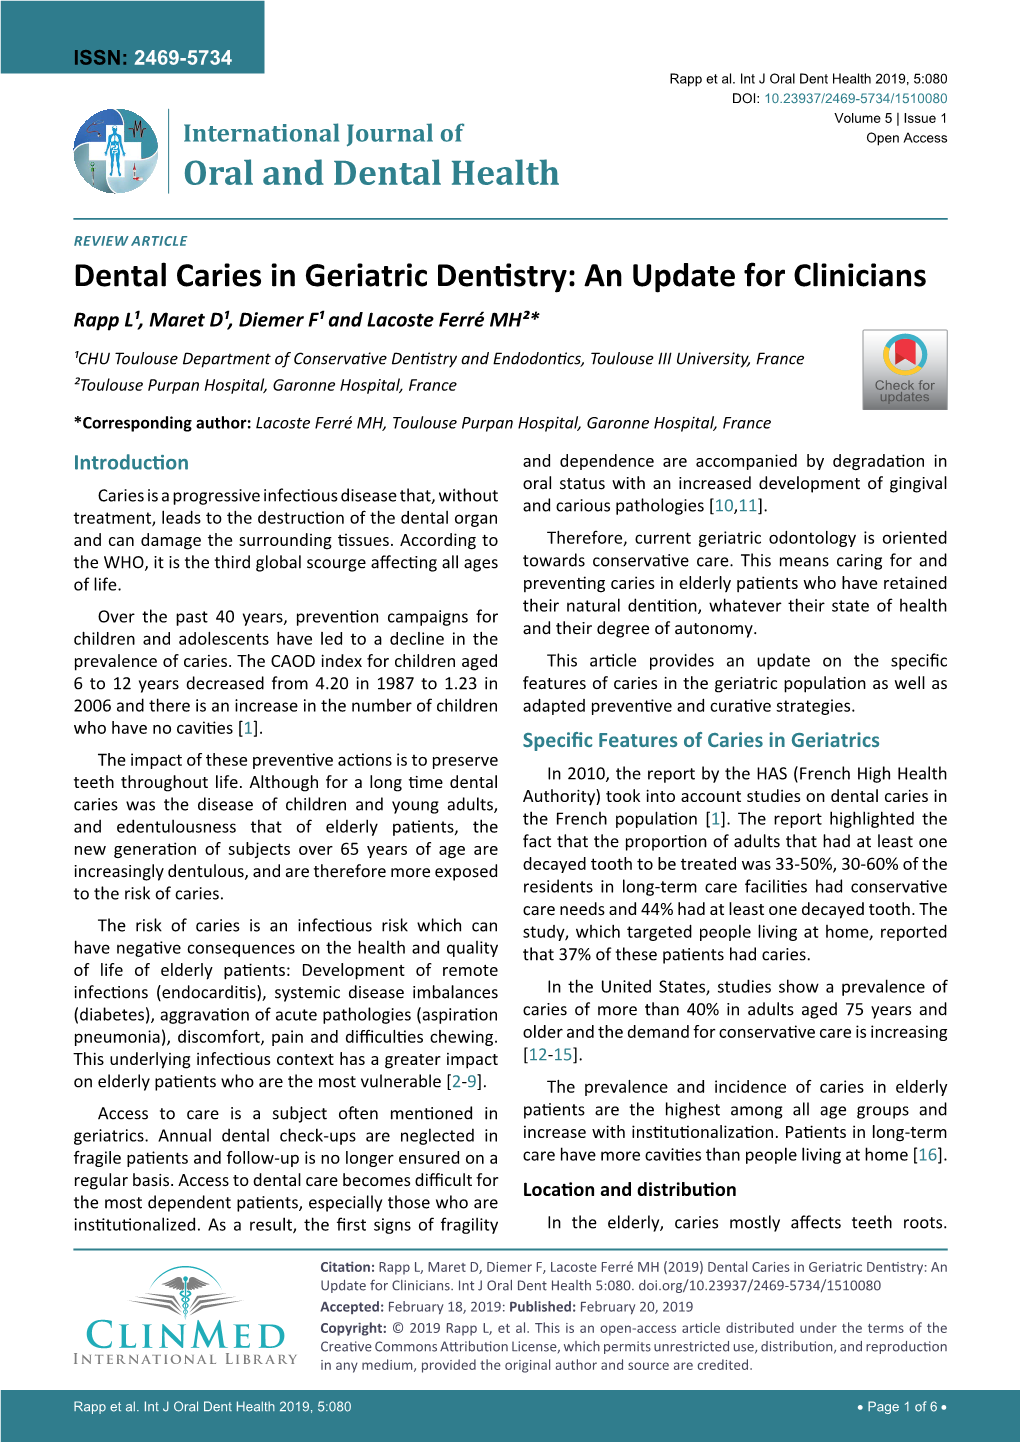 Dental Caries in Geriatric Dentistry: an Update for Clinicians Rapp L¹, Maret D¹, Diemer F¹ and Lacoste Ferré MH²*